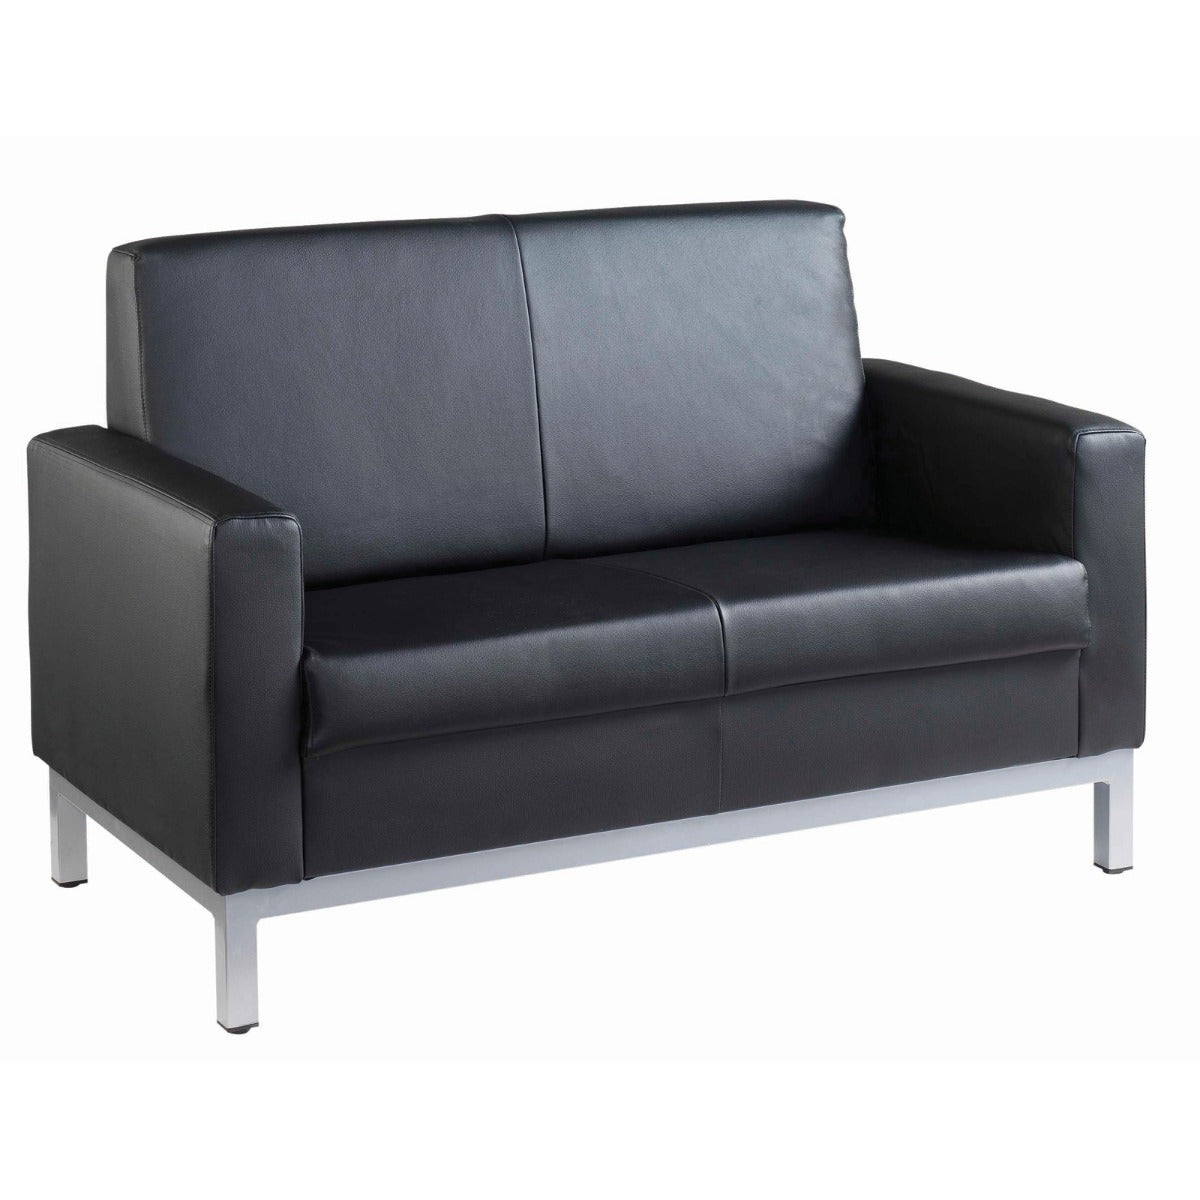 Helsinki Faux Leather Sofa - 1, 2, 3 Seater Available